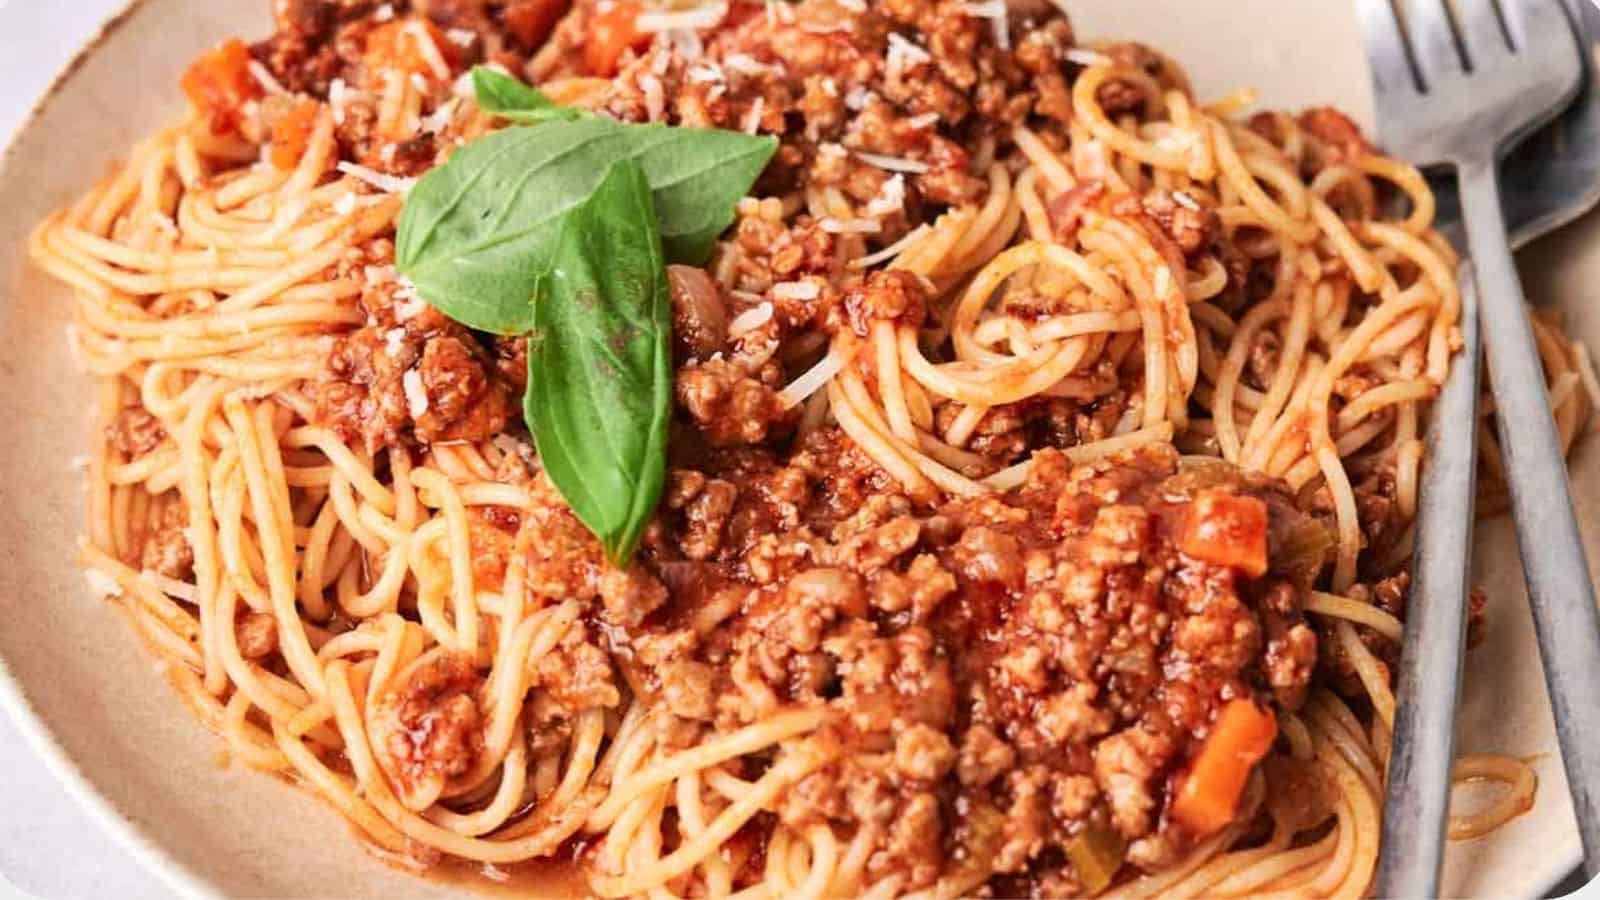 <p>Imagine sitting down to a plate of our Spaghetti Bolognese, rich with flavors that remind you of traditional Italian cooking. It's heartwarming and suitable for any day of the week. Whether it's a special dinner or a regular weekday meal, it brings the comfort of Italy directly to your home. This dish is a must-try for pasta lovers.<br><strong>Get the Recipe: </strong><a href="https://www.pocketfriendlyrecipes.com/spaghetti-bolognese/?utm_source=msn&utm_medium=page&utm_campaign=">Spaghetti Bolognese</a></p>